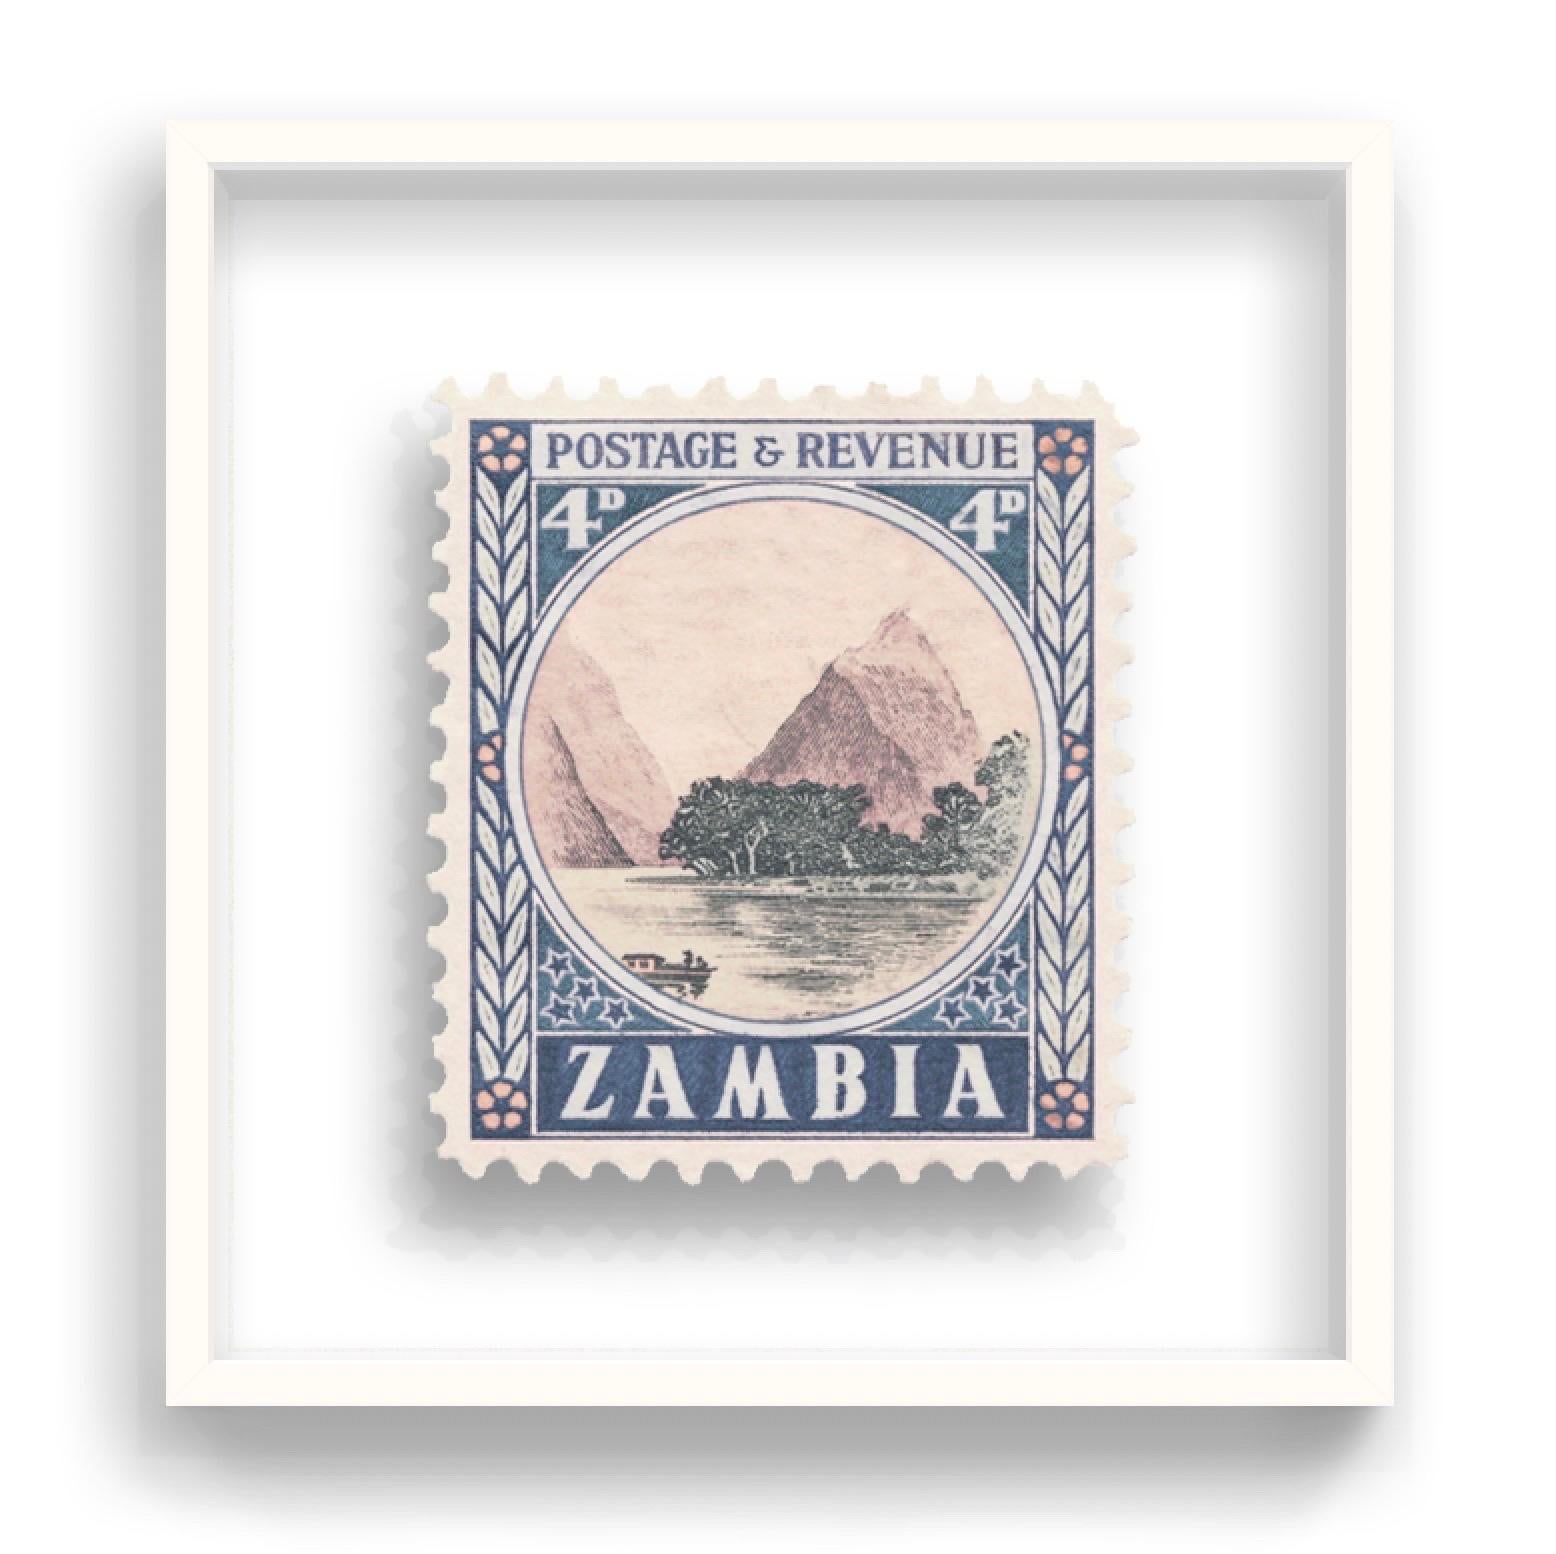 Guy Gee, Zambia (medium)

Hand-engraved print on 350gsm on G.F Smith card
31 x 35 cm (12 1/5 x 13 4/5)
Frame included 
Edition of 75 

Each artwork by Guy had been digitally reimagined from an original postage stamp. Cut out and finished by hand,